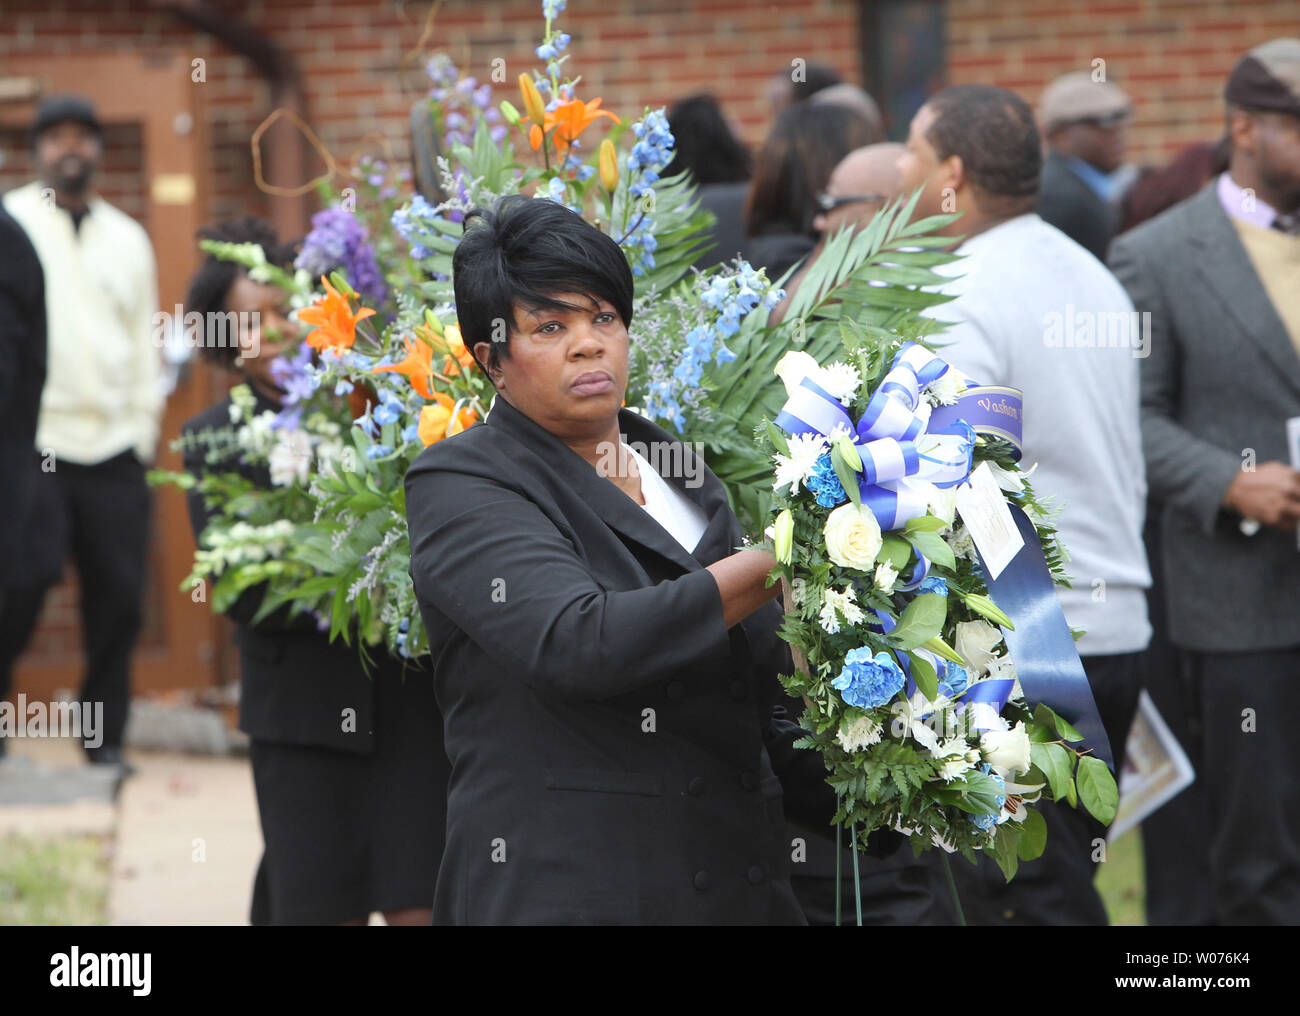 Officials bring flowers behind the casket of Jerry Brown, Jr. during his funeral at the Hopewell Missionary Baptist Church in St. Louis on December 15, 2012. The Dallas CowboysÕ practice squad nose tackle was killed in an Irving car accident on December 8, 2012 when his best friend and teammate Josh Brent hit a curb, flipping the vehicle.    UPI/Bill Greenblatt Stock Photo